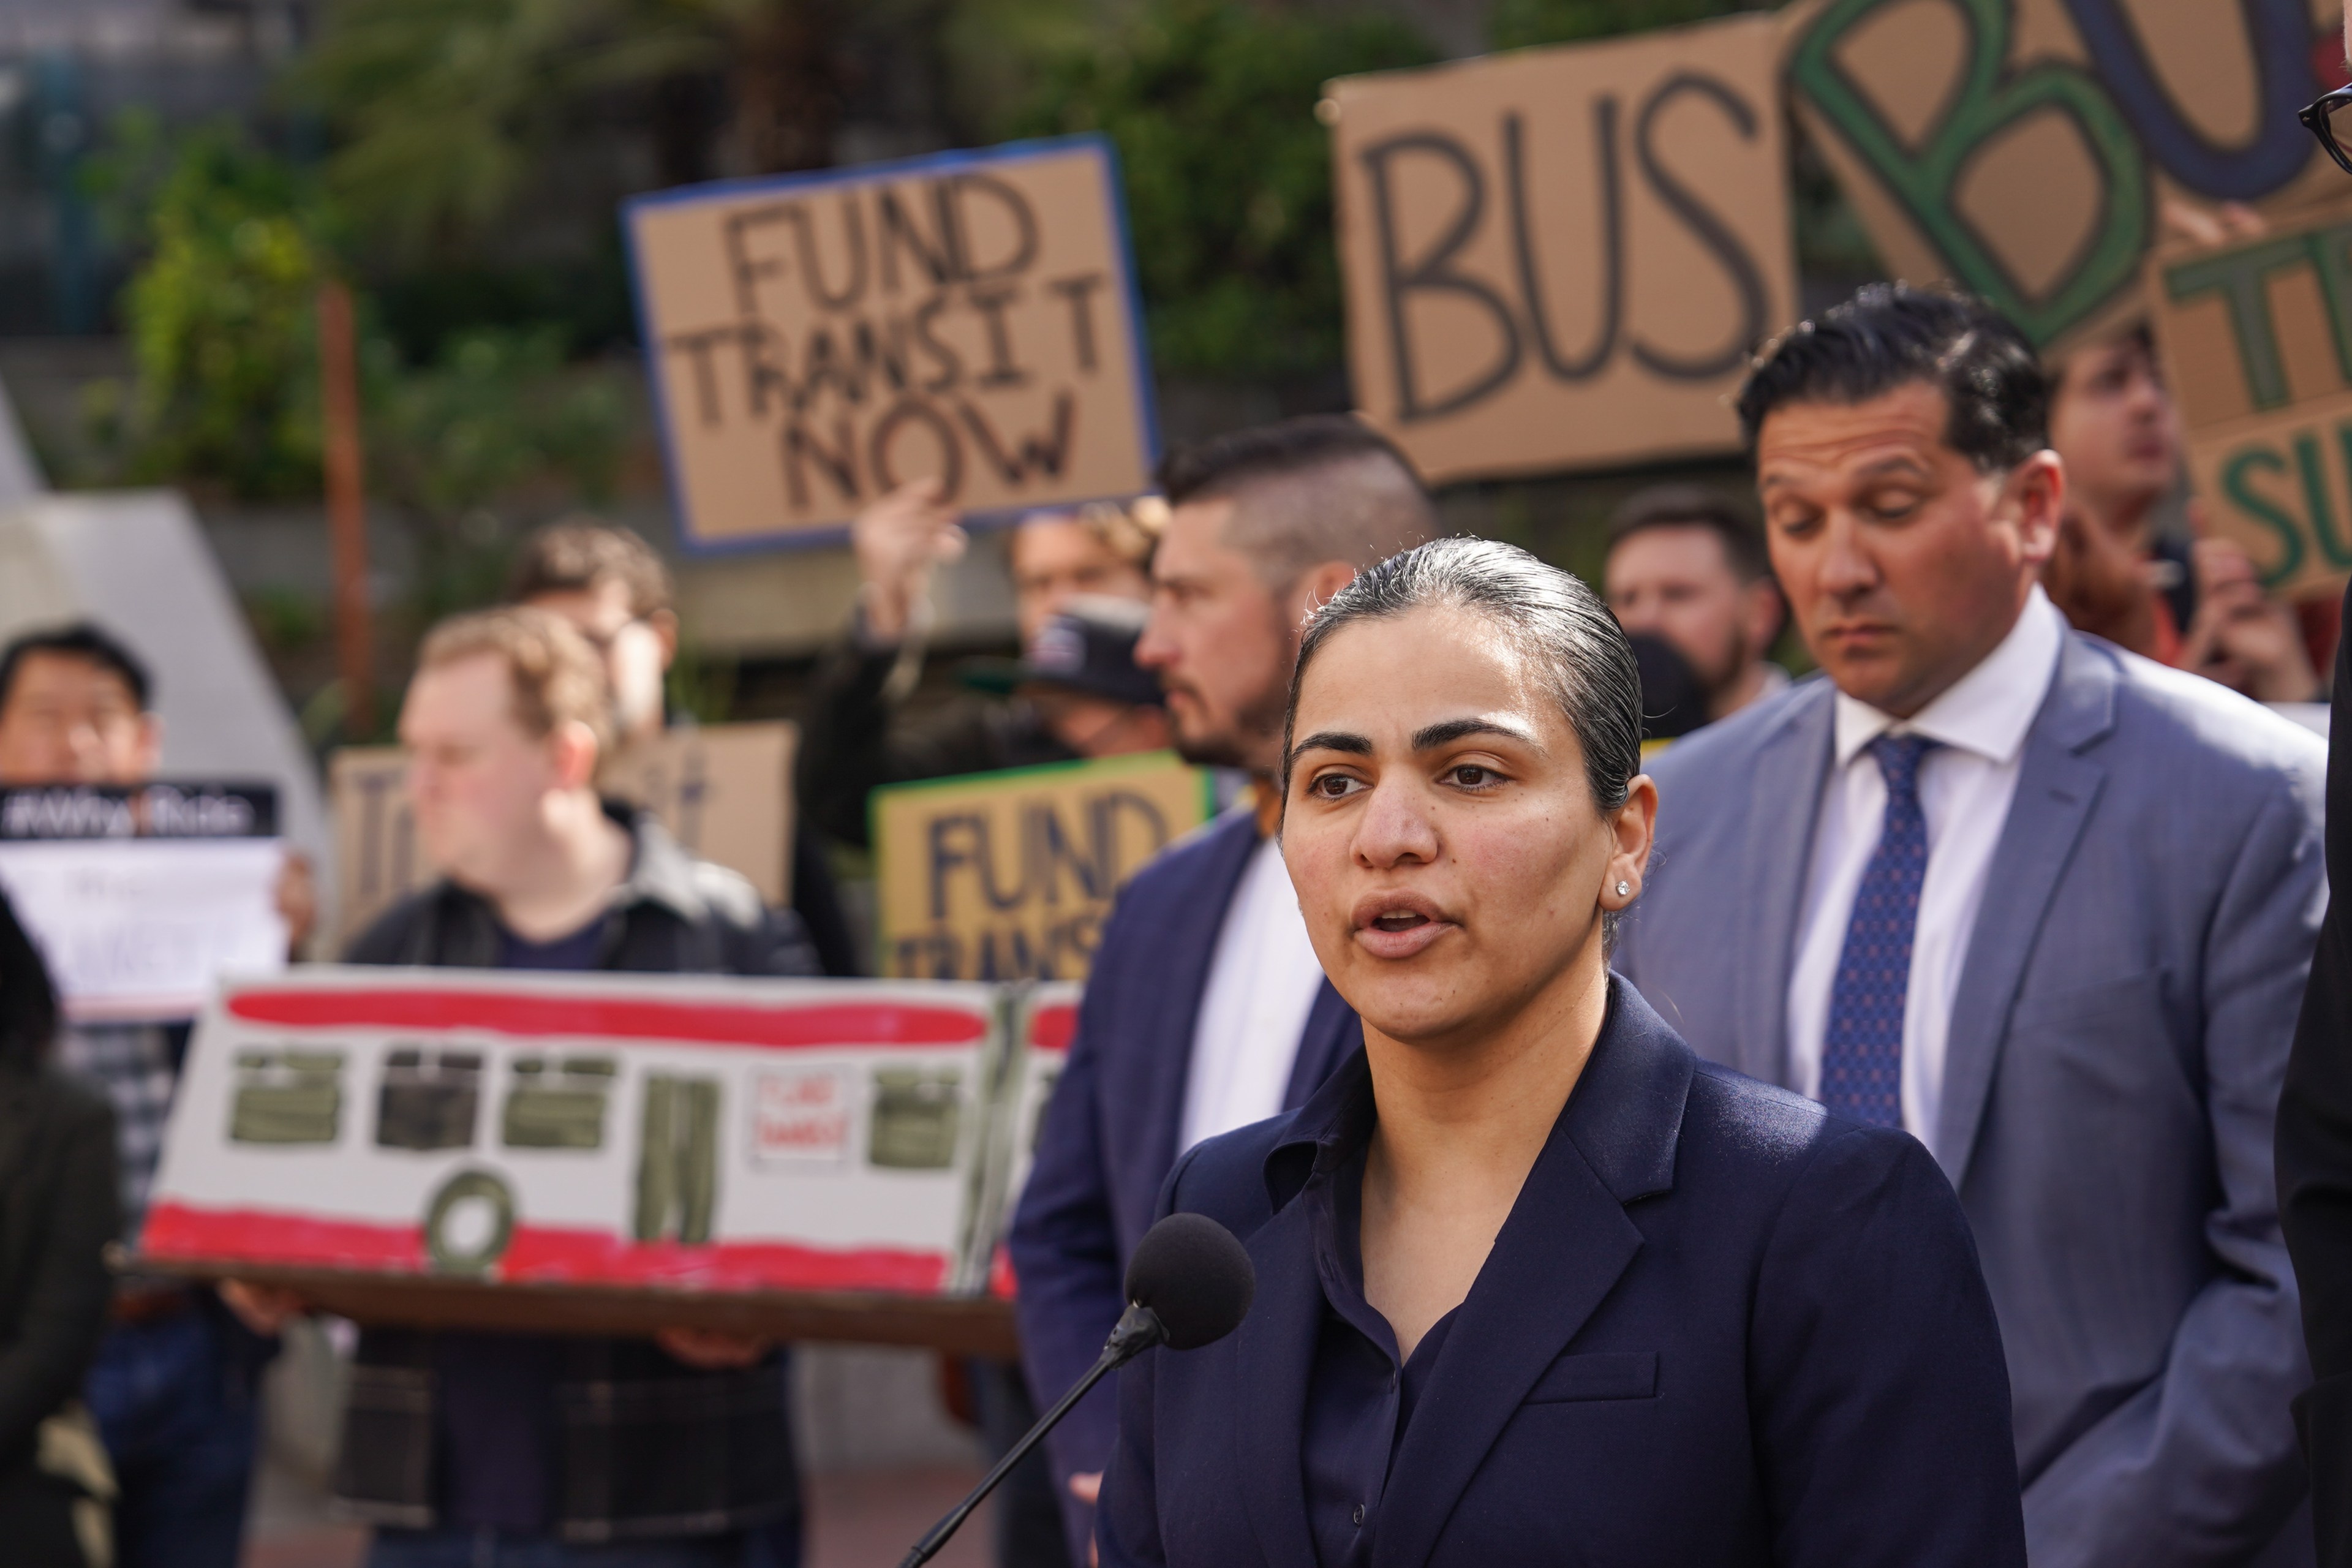 A woman speaks at a rally holding a model bus, with protesters and signs saying &quot;Fund Transit Now&quot; in the background.